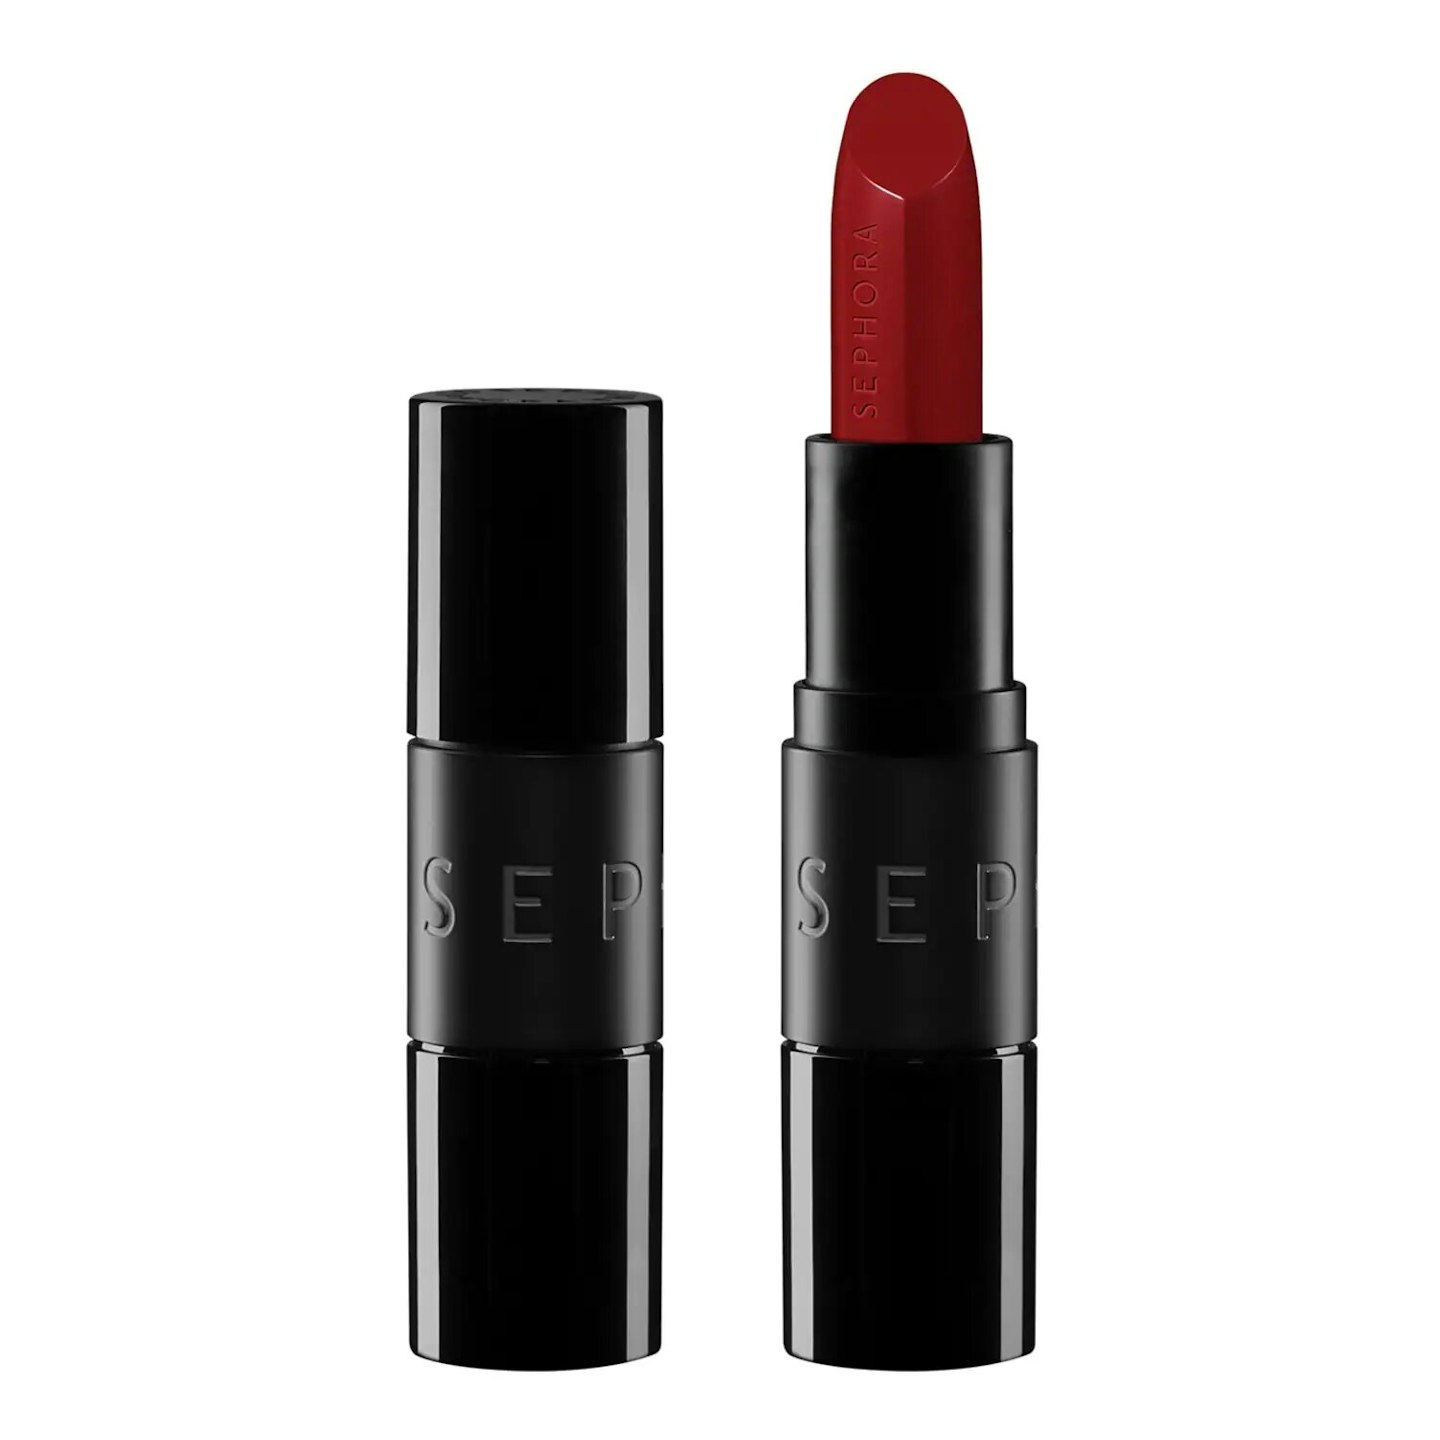 Sephora Rouge Is Not My Name Lipstick